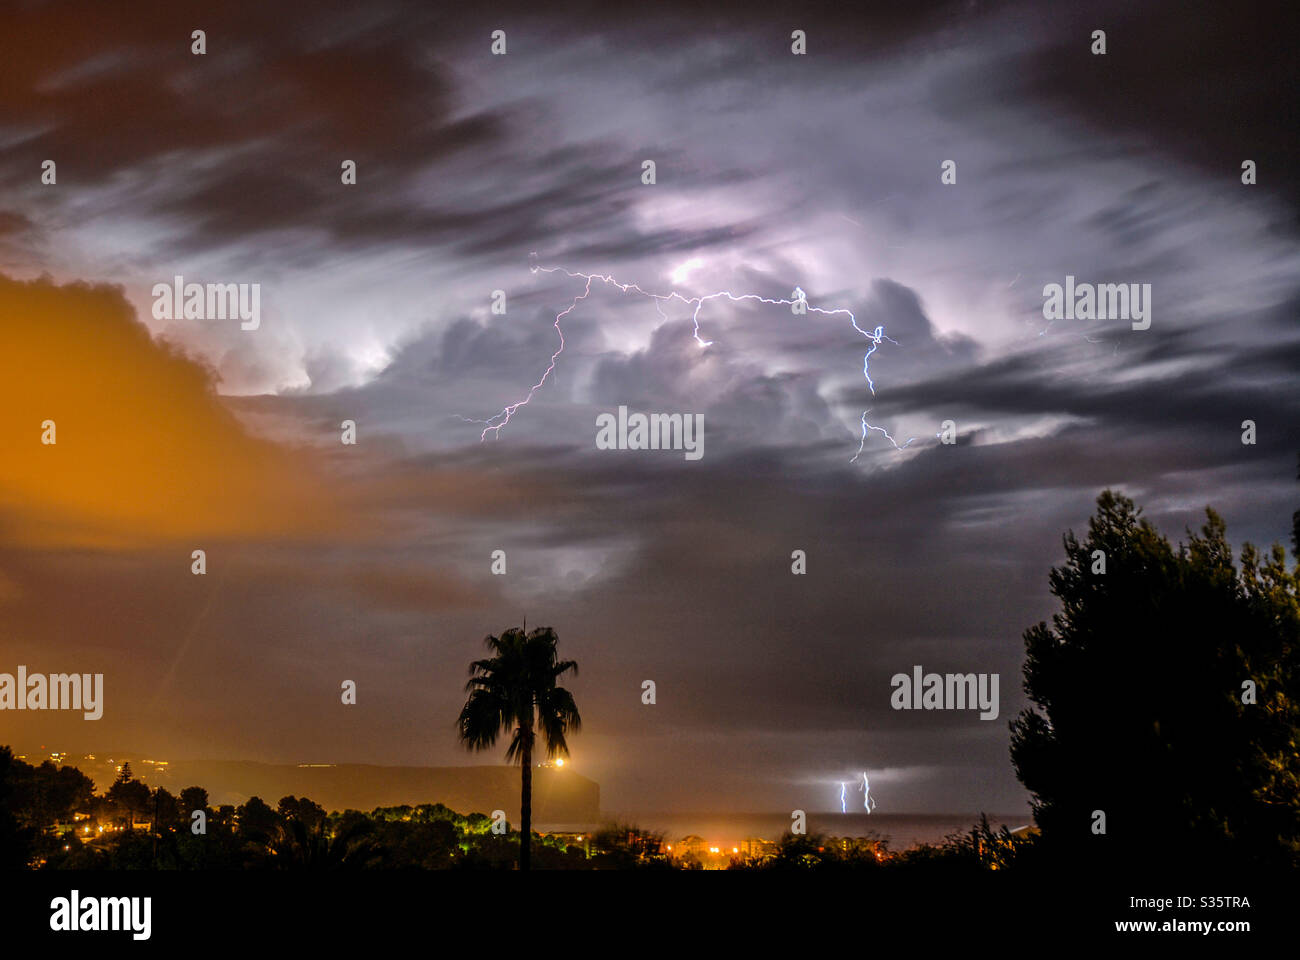 Electric storm out to sea with palm tree and town lights in foreground Stock Photo